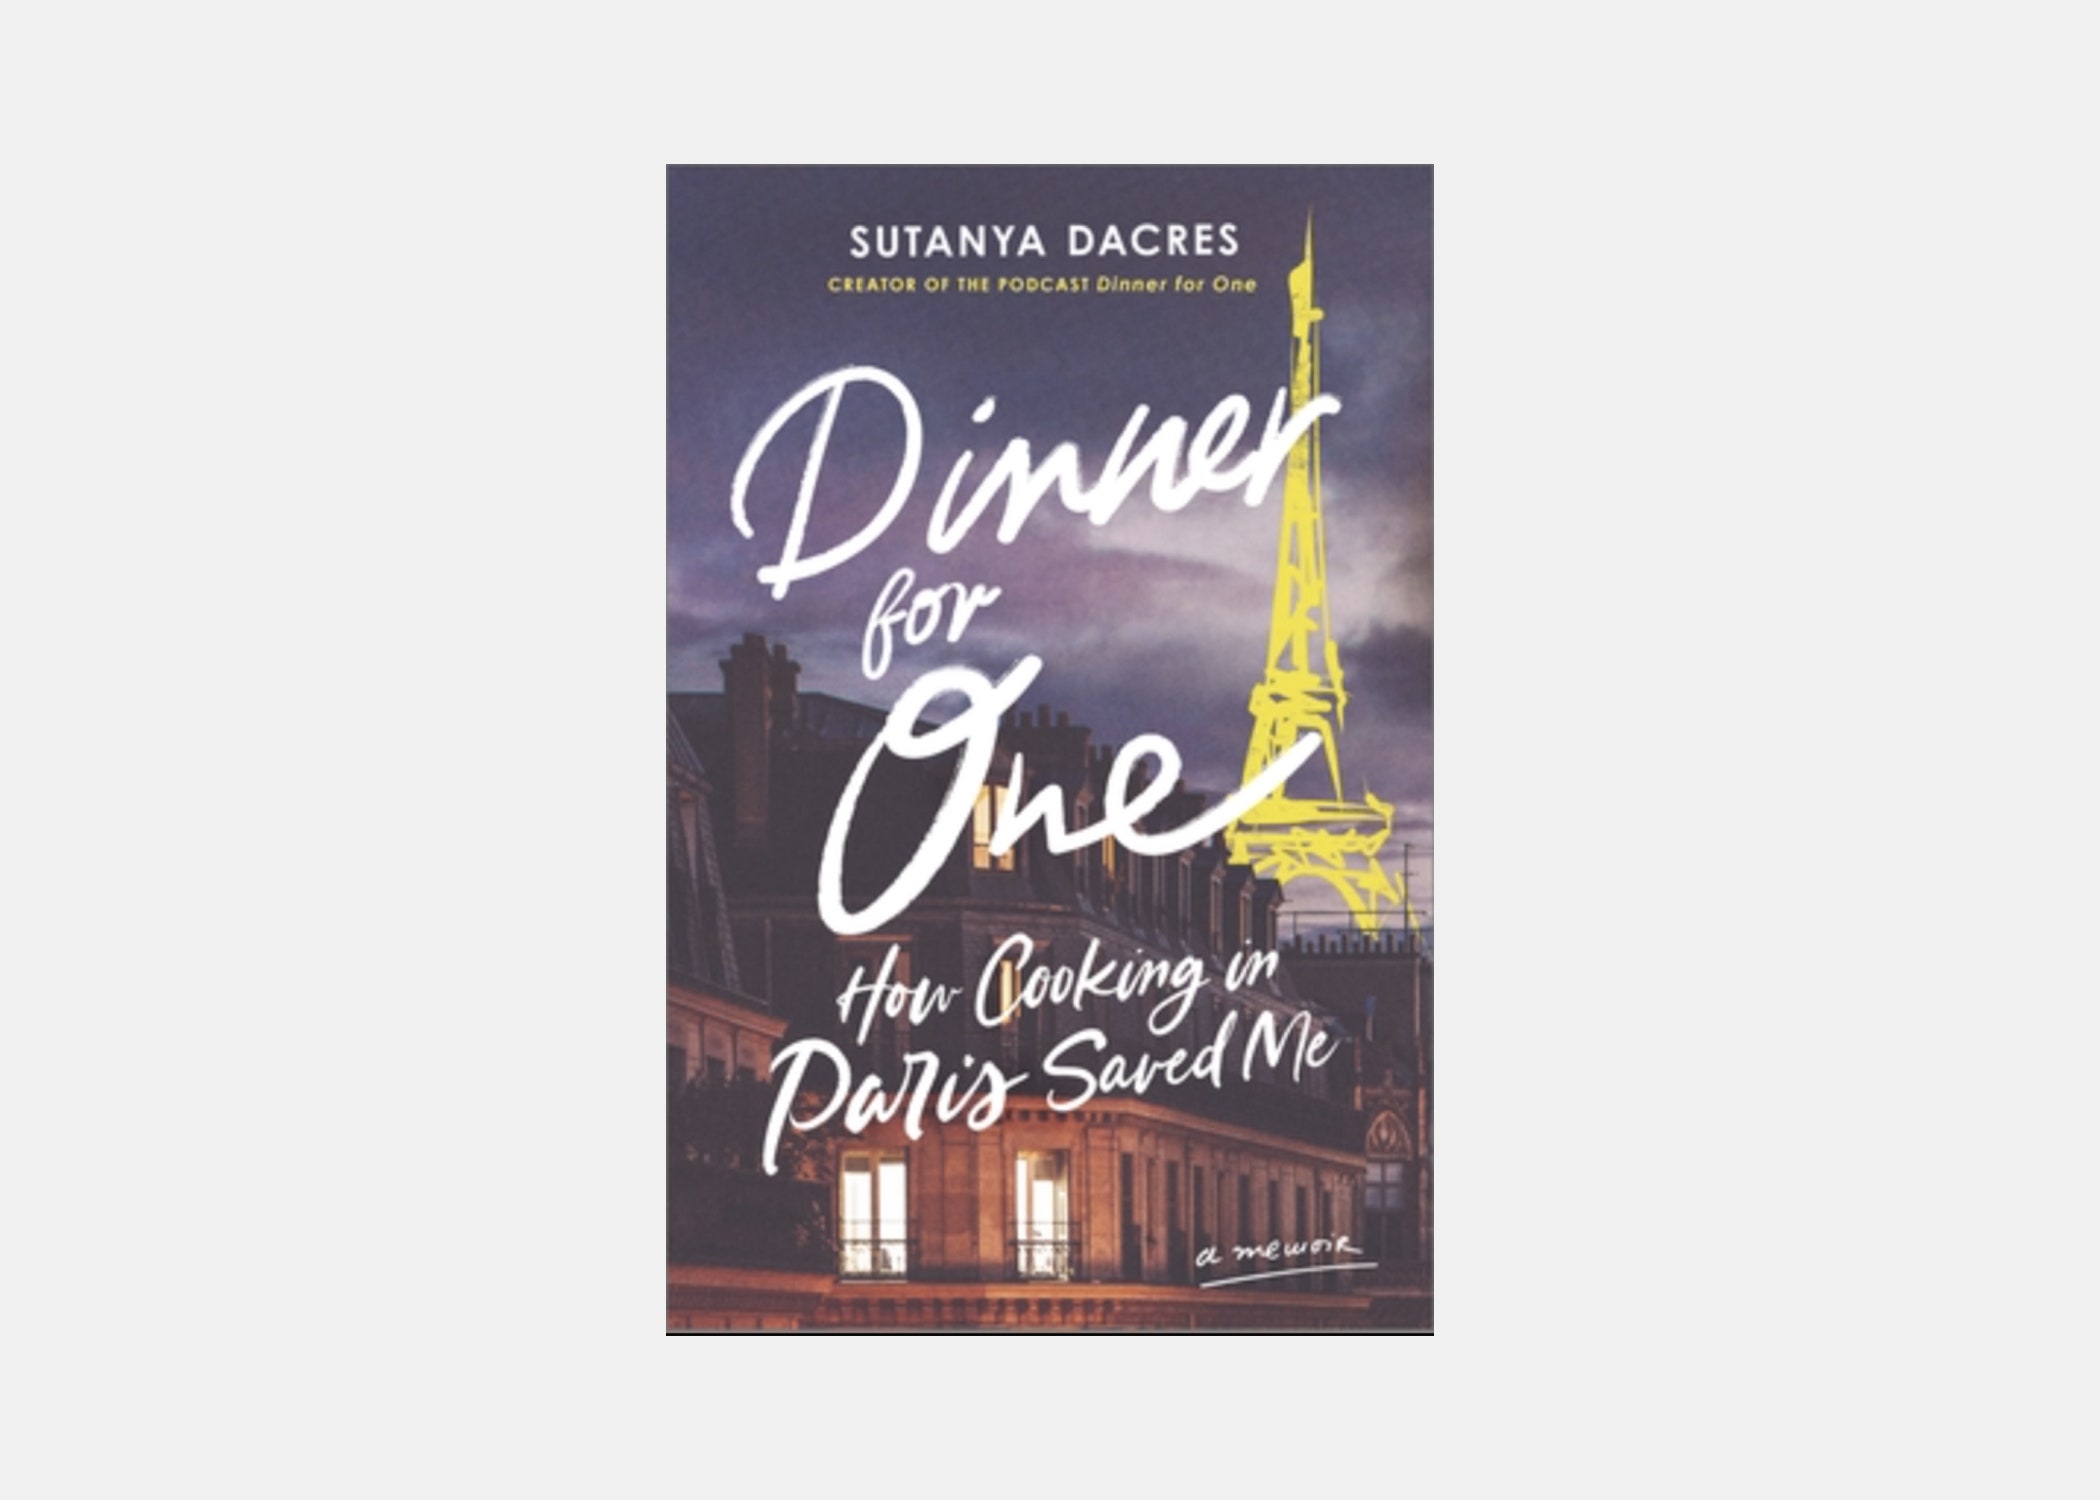 <p><strong>What it’s about:</strong> For a more contemporary American-moves-to-Paris story pick up <em>Dinner for One</em>, the debut memoir of Sutanya Dacres, the host of <a href="https://www.dinnerforonepodcast.com/">the eponymous podcast</a>. Reeling from the sudden expiration of her marriage to The Frenchman (“let’s call him TFM for short,” she says) for whom she moved to France, she cooks her way through healing and back to joy while rebuilding her life in her Montmartre apartment. These pages are filled with equal parts optimism and realism, hope and loss, American glee and Parisian bite. It’s an absolute must-read.</p> <p><strong>You should read this when:</strong> You’re one slightly-mean email away from snapping and absconding to France in a last-ditch effort to fall back in love with your life (and it just might work).</p> <p><strong>The book’s opening lines:</strong> “The day I reached my breaking point started out like so many others since my husband had left four months earlier—wake up, get ready, and leave my apartment as quickly as possible. Decently sized by Paris standards, the 463-square-foot apartment faced south, overlooking a shared courtyard, with double-door windows that spilled sunlight into the bedroom and living room.”</p> $19, Amazon. <a href="https://www.amazon.com/Dinner-One-Cooking-Paris-Saved/dp/0778387151/ref=tmm_pap_swatch_0">Get it now!</a><p>Sign up to receive the latest news, expert tips, and inspiration on all things travel</p><a href="https://www.cntraveler.com/newsletter/the-daily?sourceCode=msnsend">Inspire Me</a>